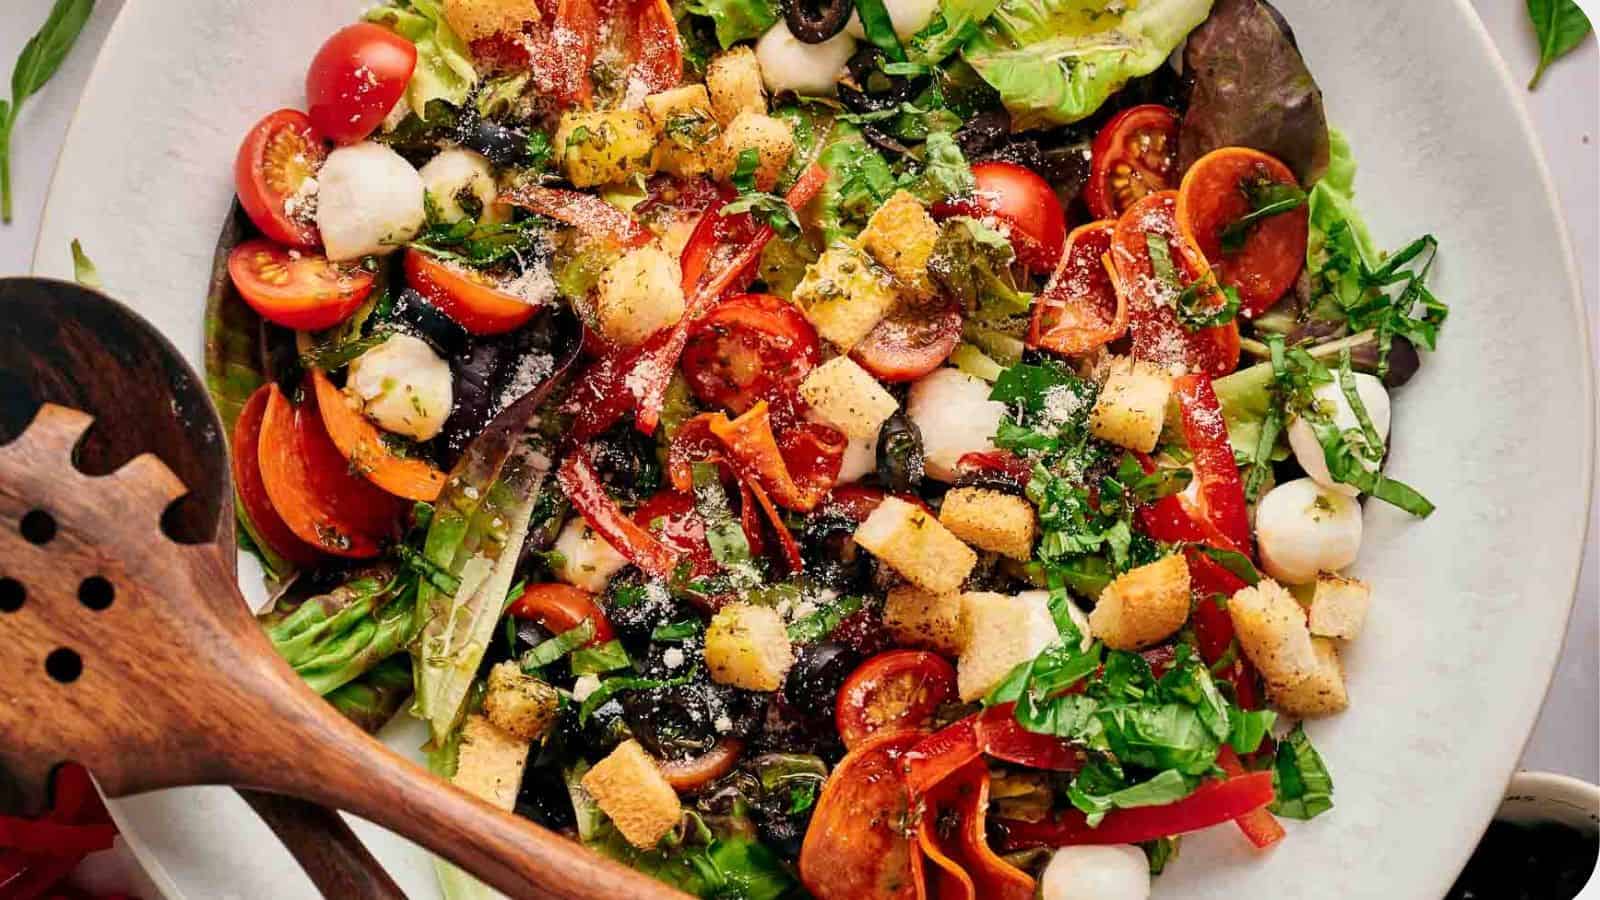 <p>Looking for a lighter way to celebrate Thursday turning into Friday? Try our Pizza Salad. It’s an eclectic mix of your favorite pizza toppings tossed with refreshing greens, promising a flavor-filled transition to the weekend. With the Pizza Salad, you can indulge early in the joyous feeling that typically starts on a Friday night.<br><strong>Get the Recipe: </strong><a href="https://www.splashoftaste.com/pizza-salad/?utm_source=msn&utm_medium=page&utm_campaign=msn">Pizza Salad</a></p>